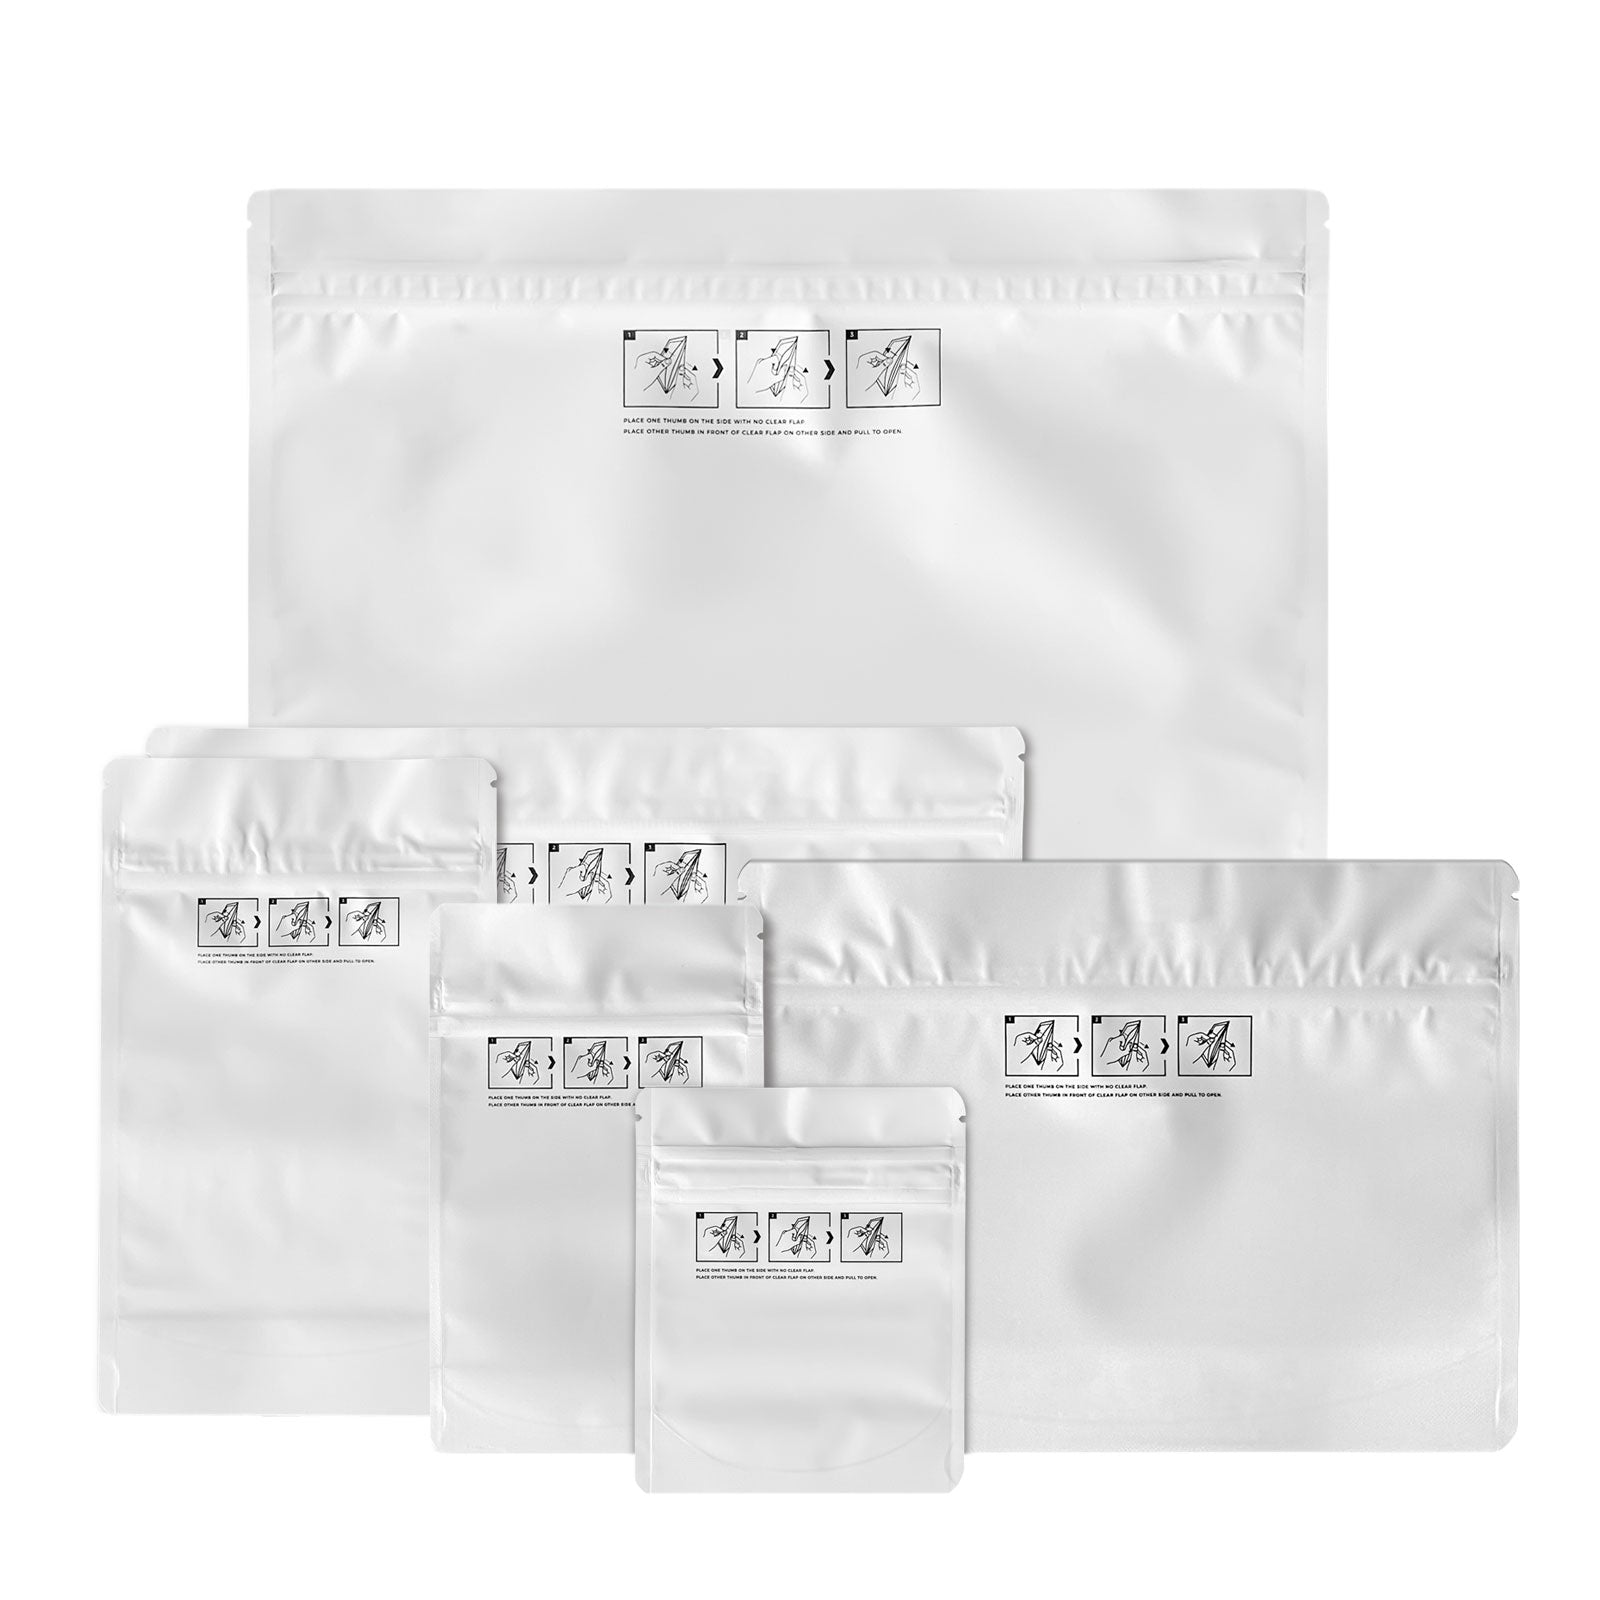 1/8 Ounce Child Resistant Bags White/Clear 4"x5"+2" - 1,000 Count